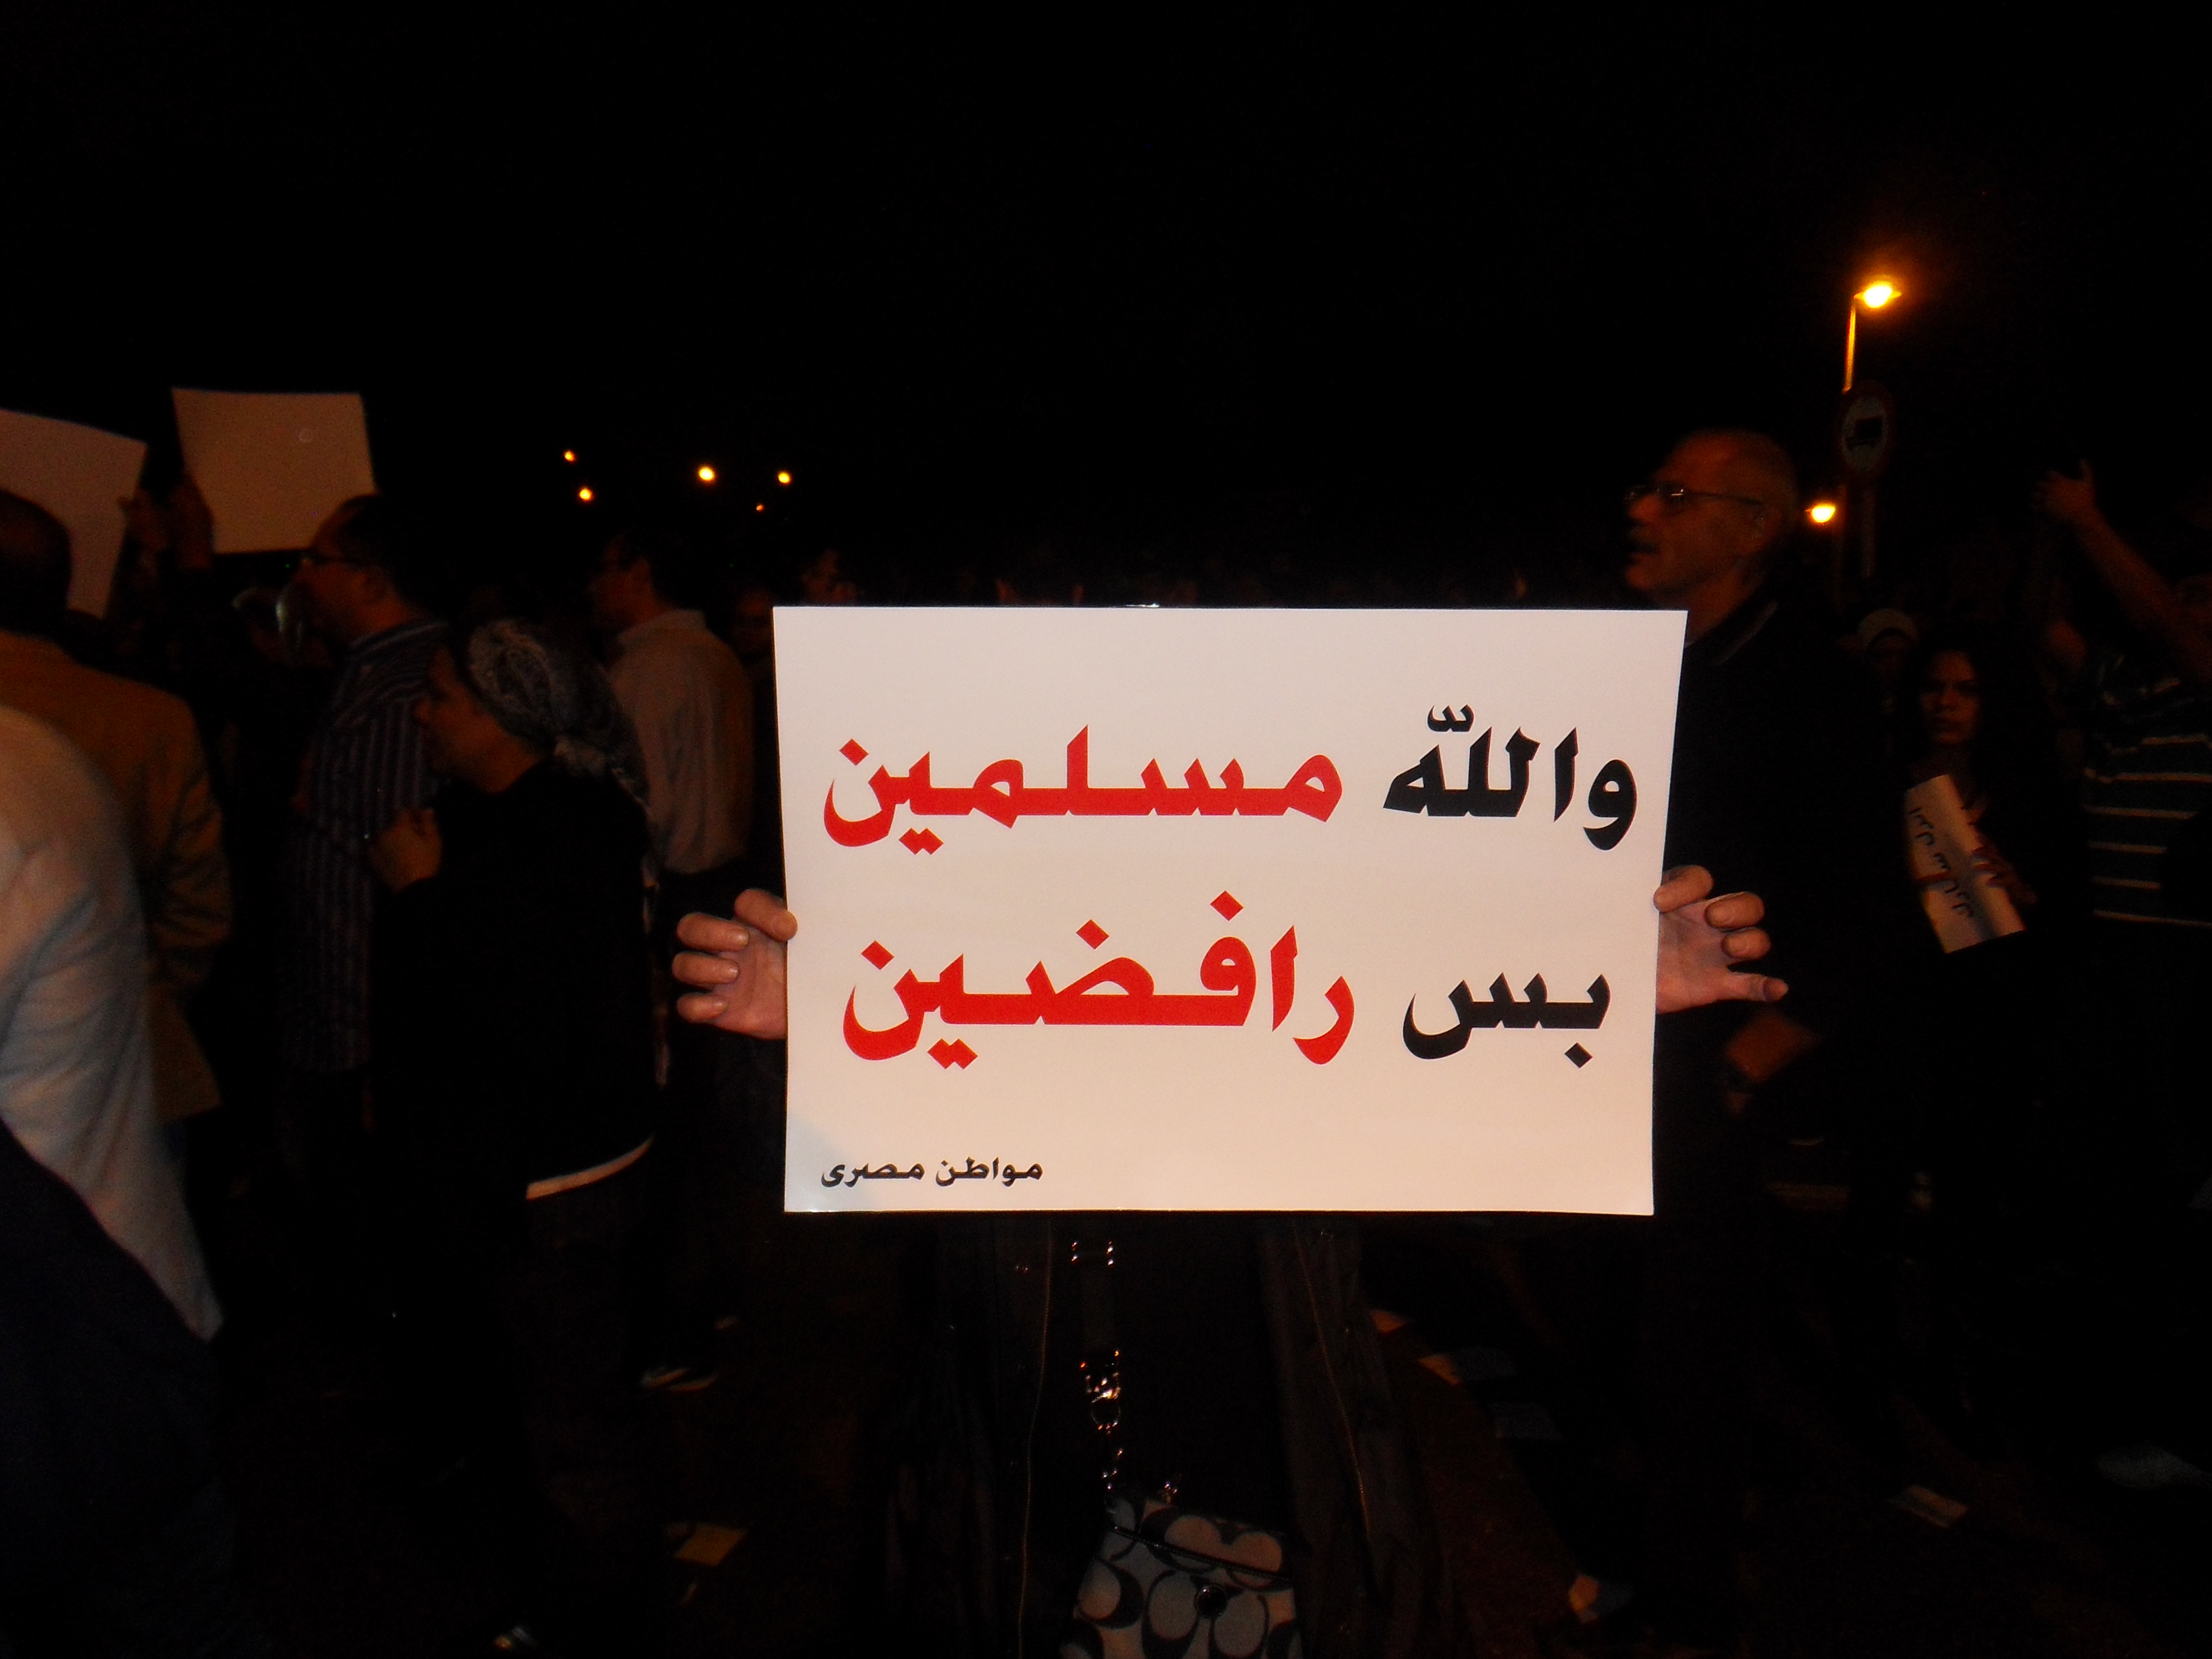 "In the name of God, we are Muslims, but we are rejecting (the recent dictatorial changes)"